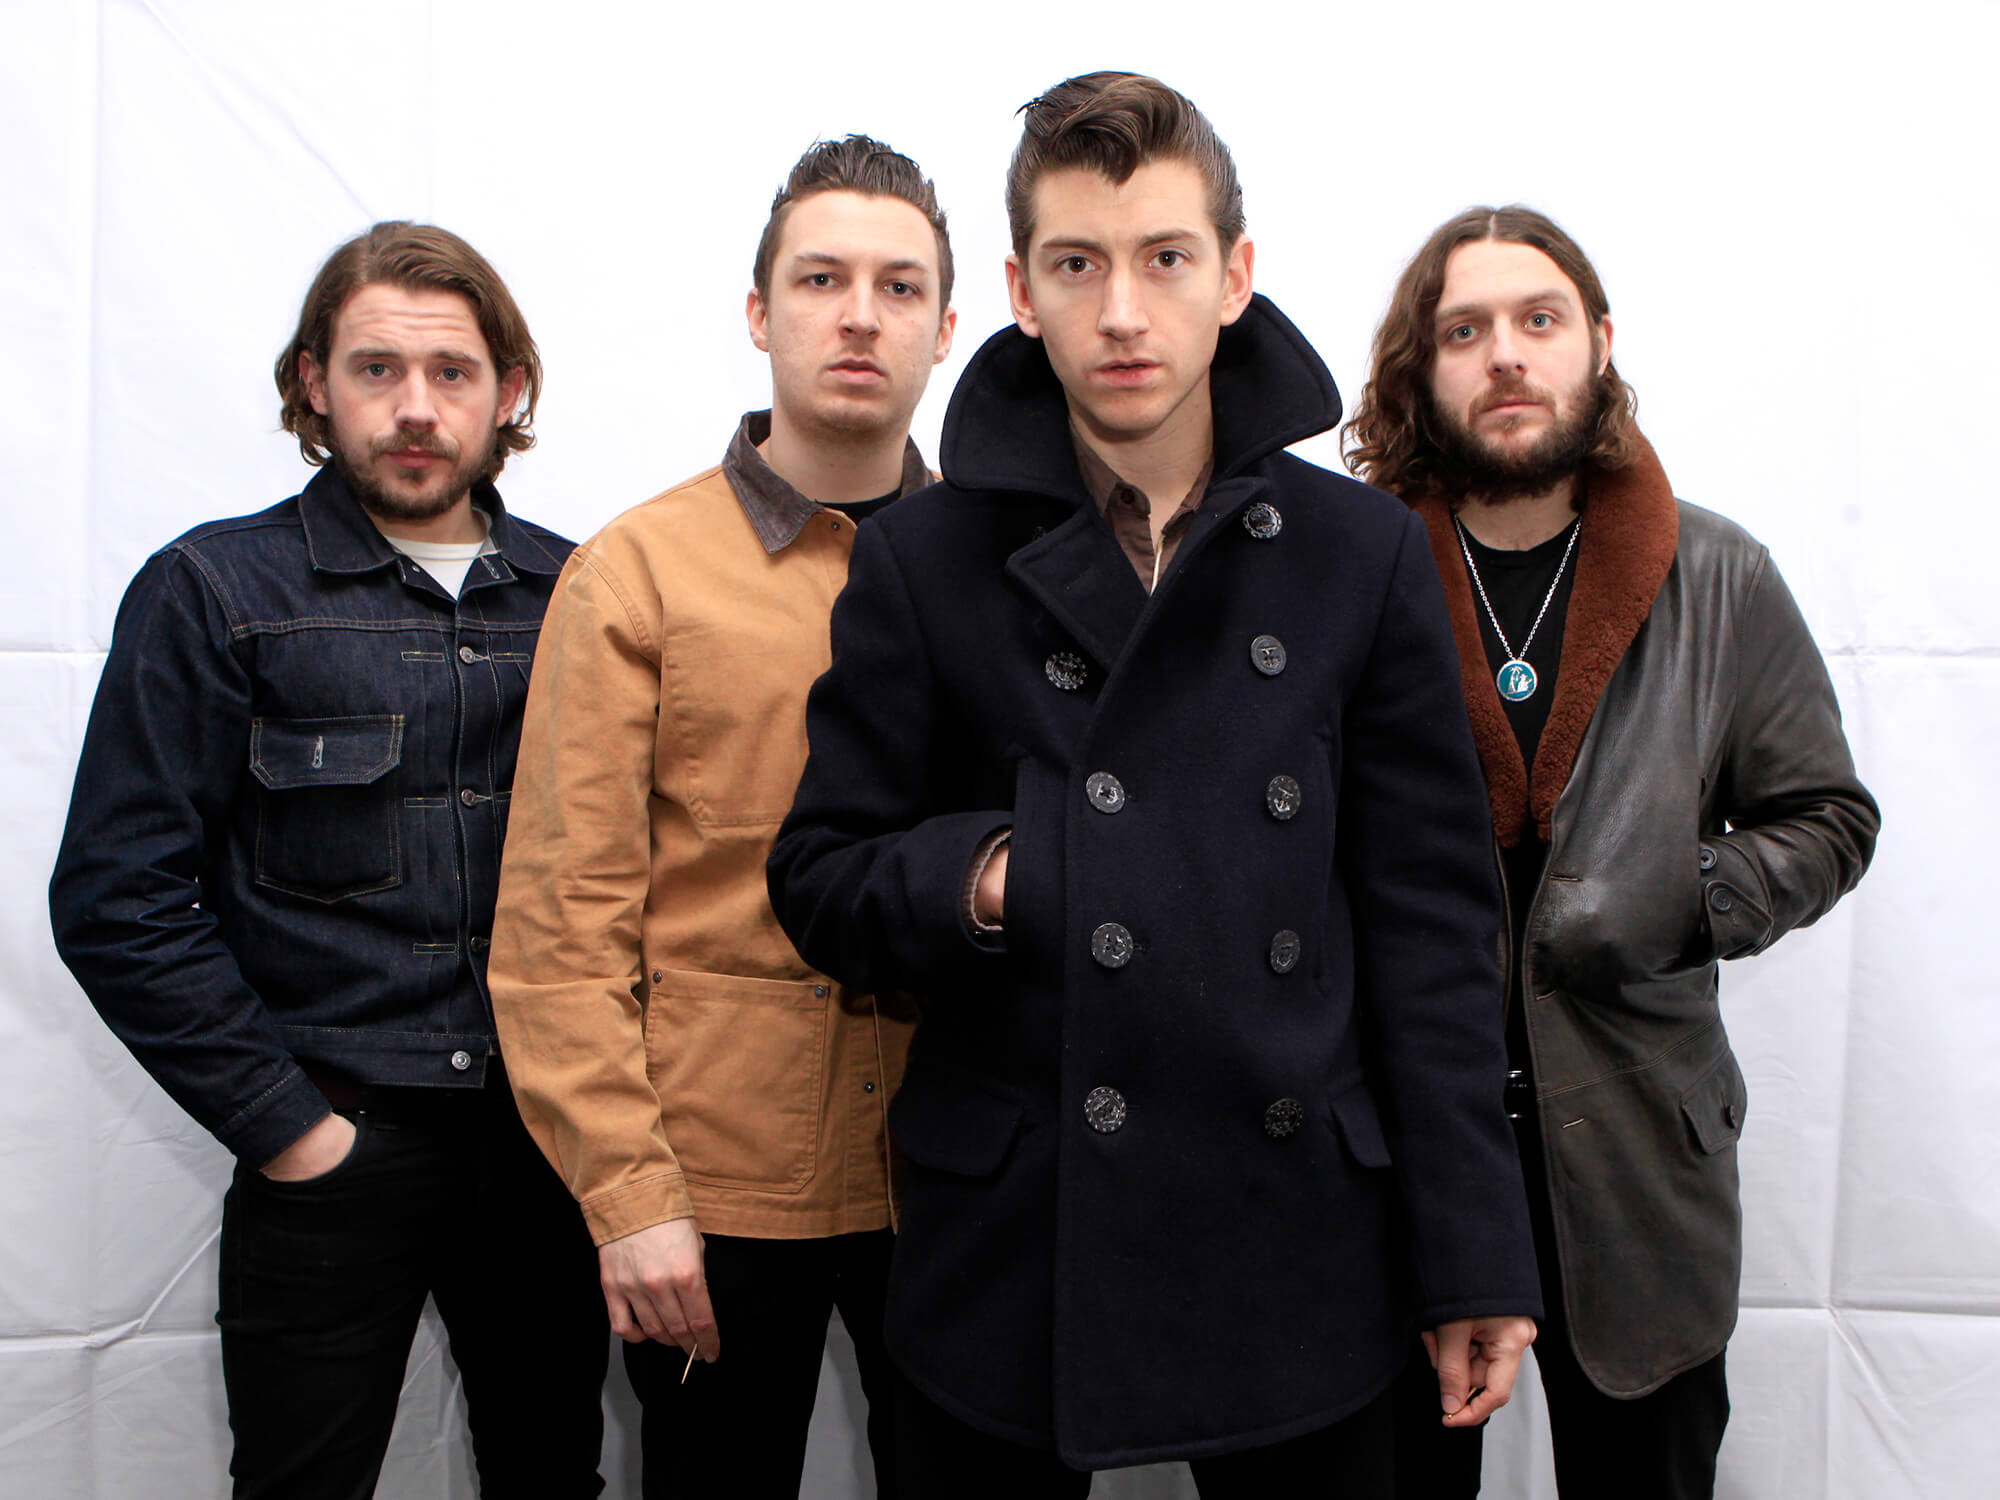 The Genius Of… AM by Arctic Monkeys